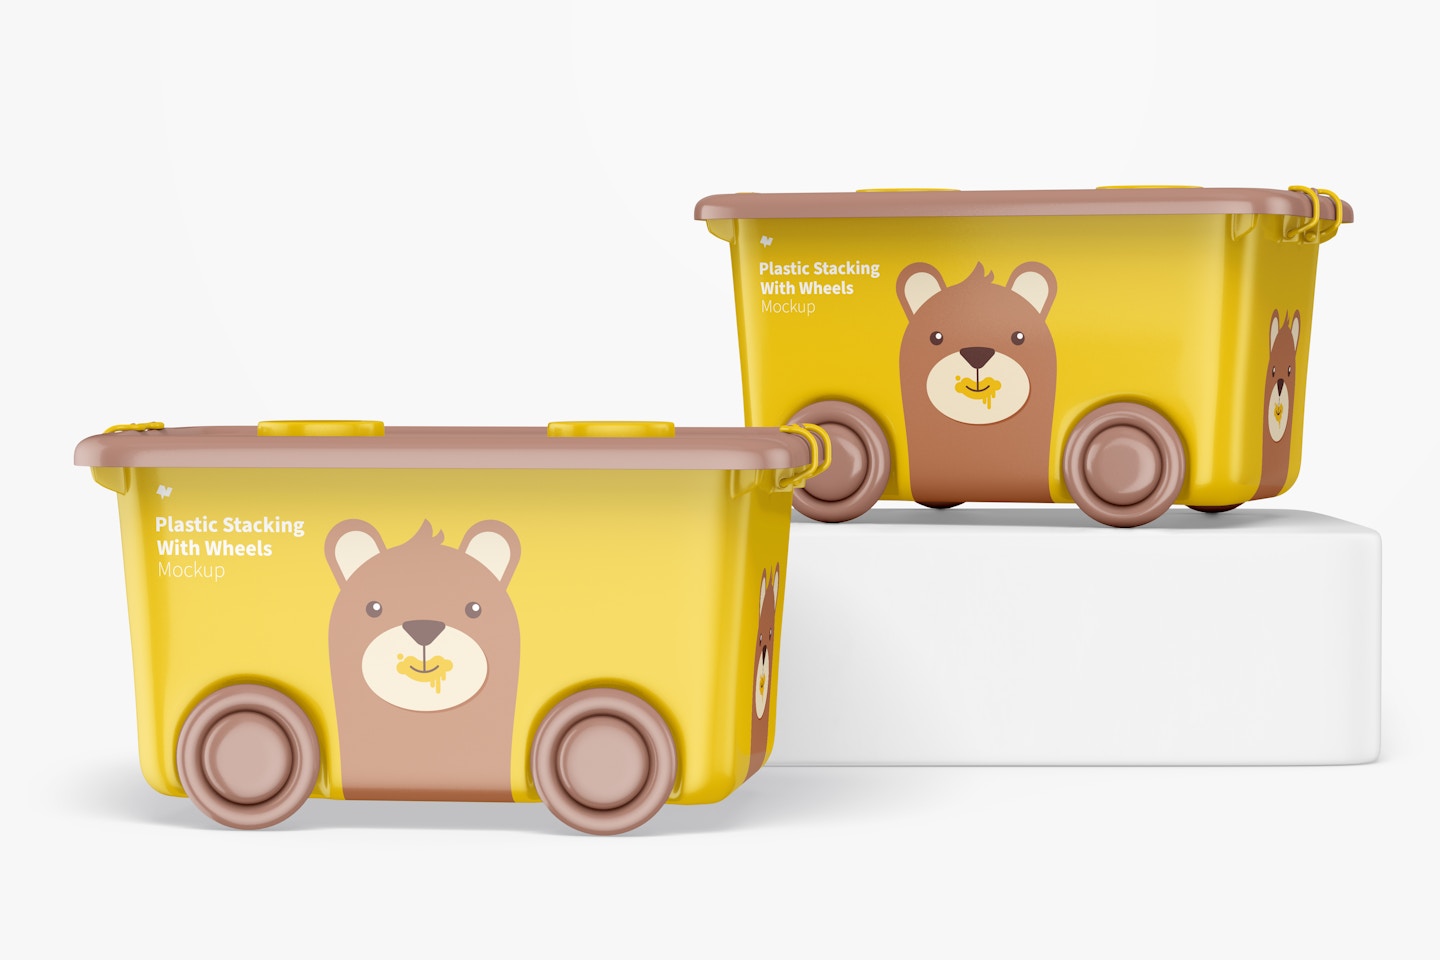 Plastic Stacking Bins with Wheels Mockup, Up and Down